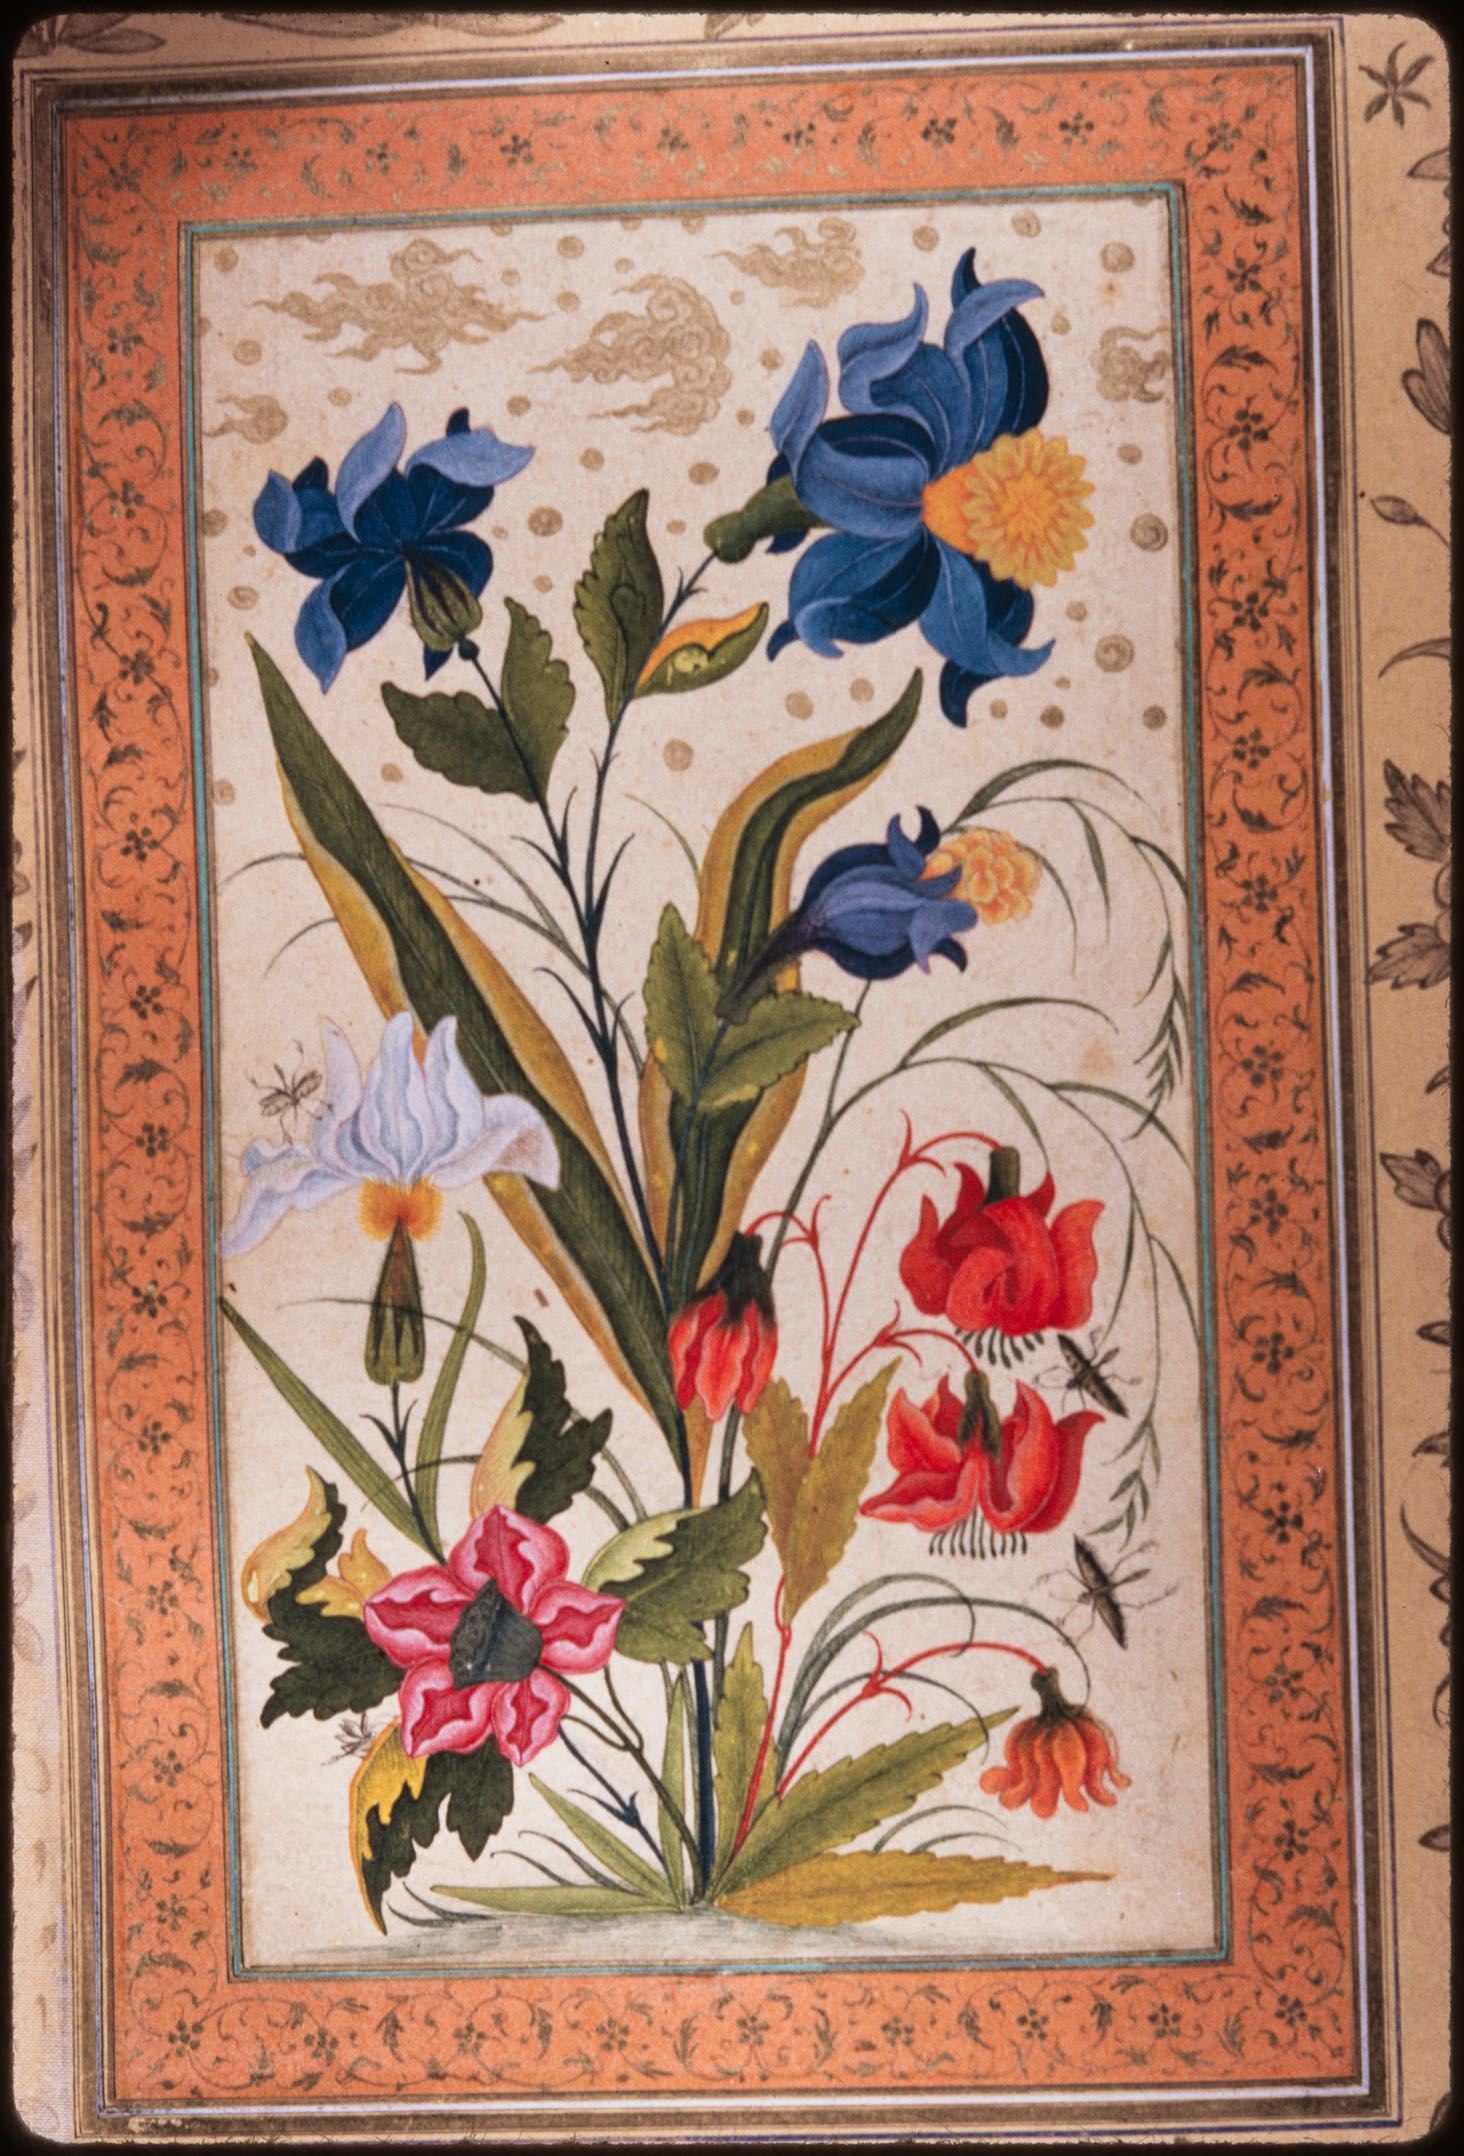 Insects alighting on exotic flowers, f. 49v from the Dara Shikoh Album (British Library Add. Or. 3129)